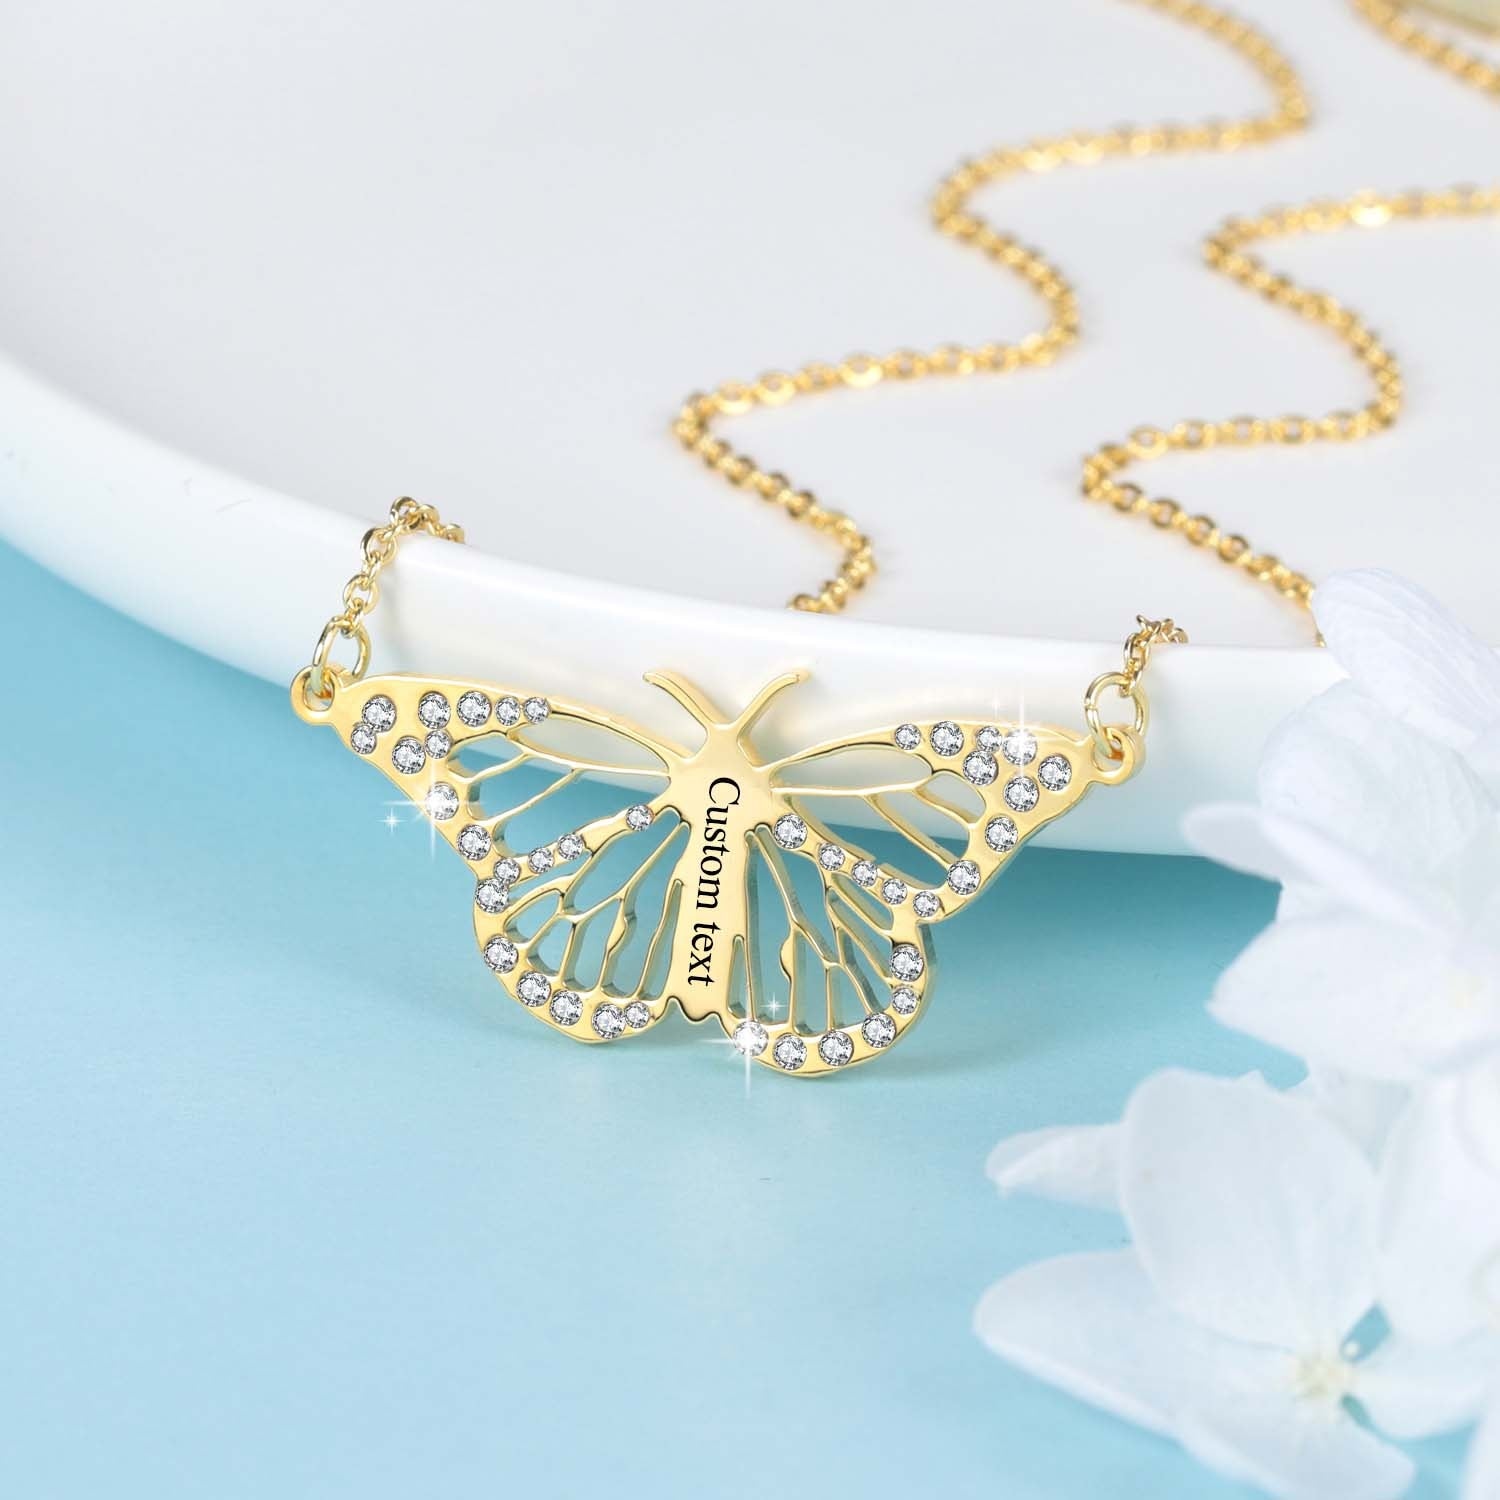 Personalized Blinged Butterfly Necklace